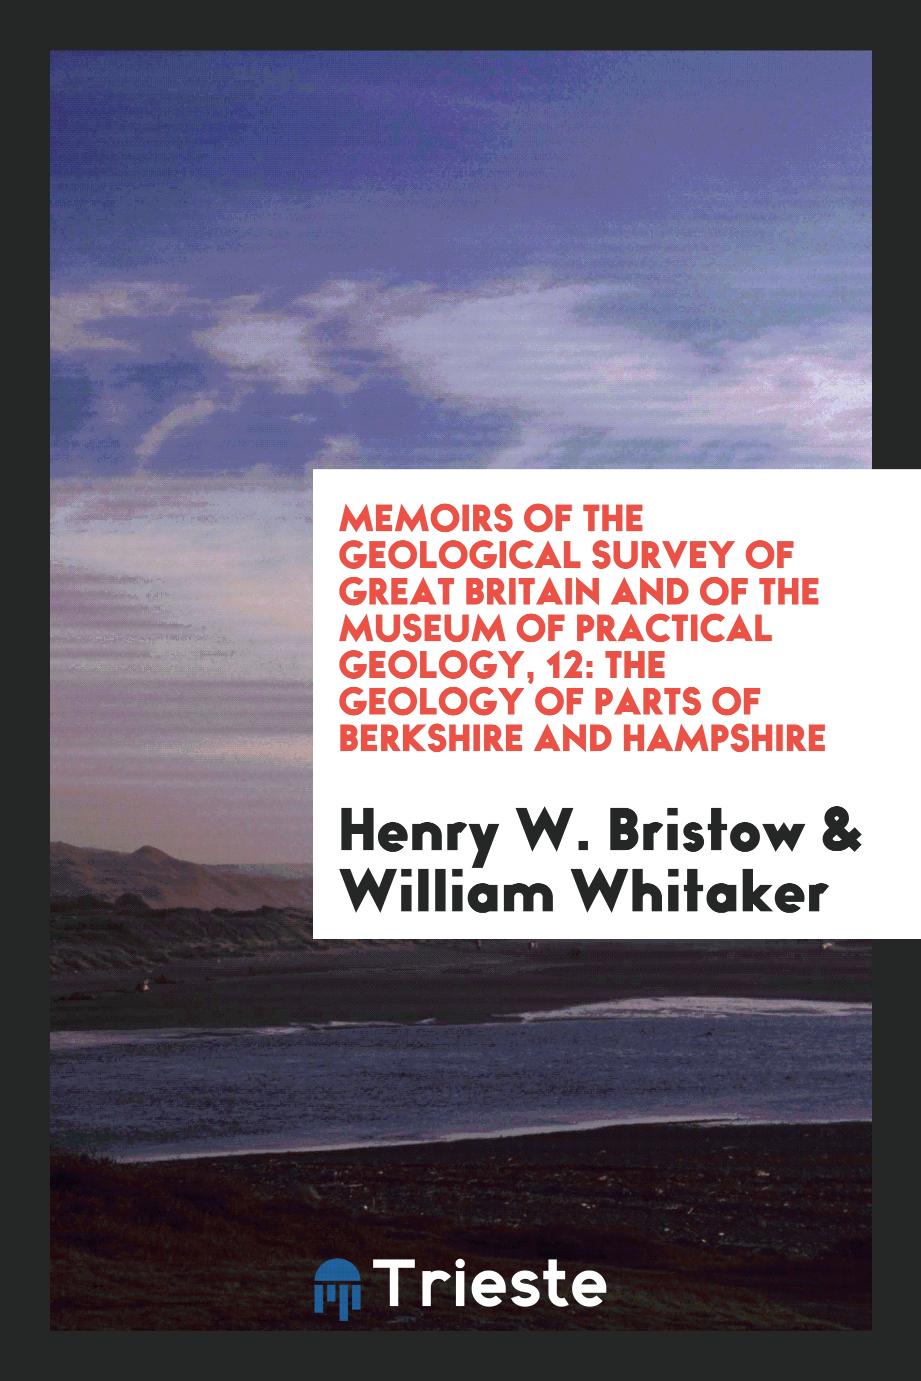 Memoirs of the Geological Survey of Great Britain and of the Museum of Practical Geology, 12: The Geology of Parts of Berkshire and Hampshire